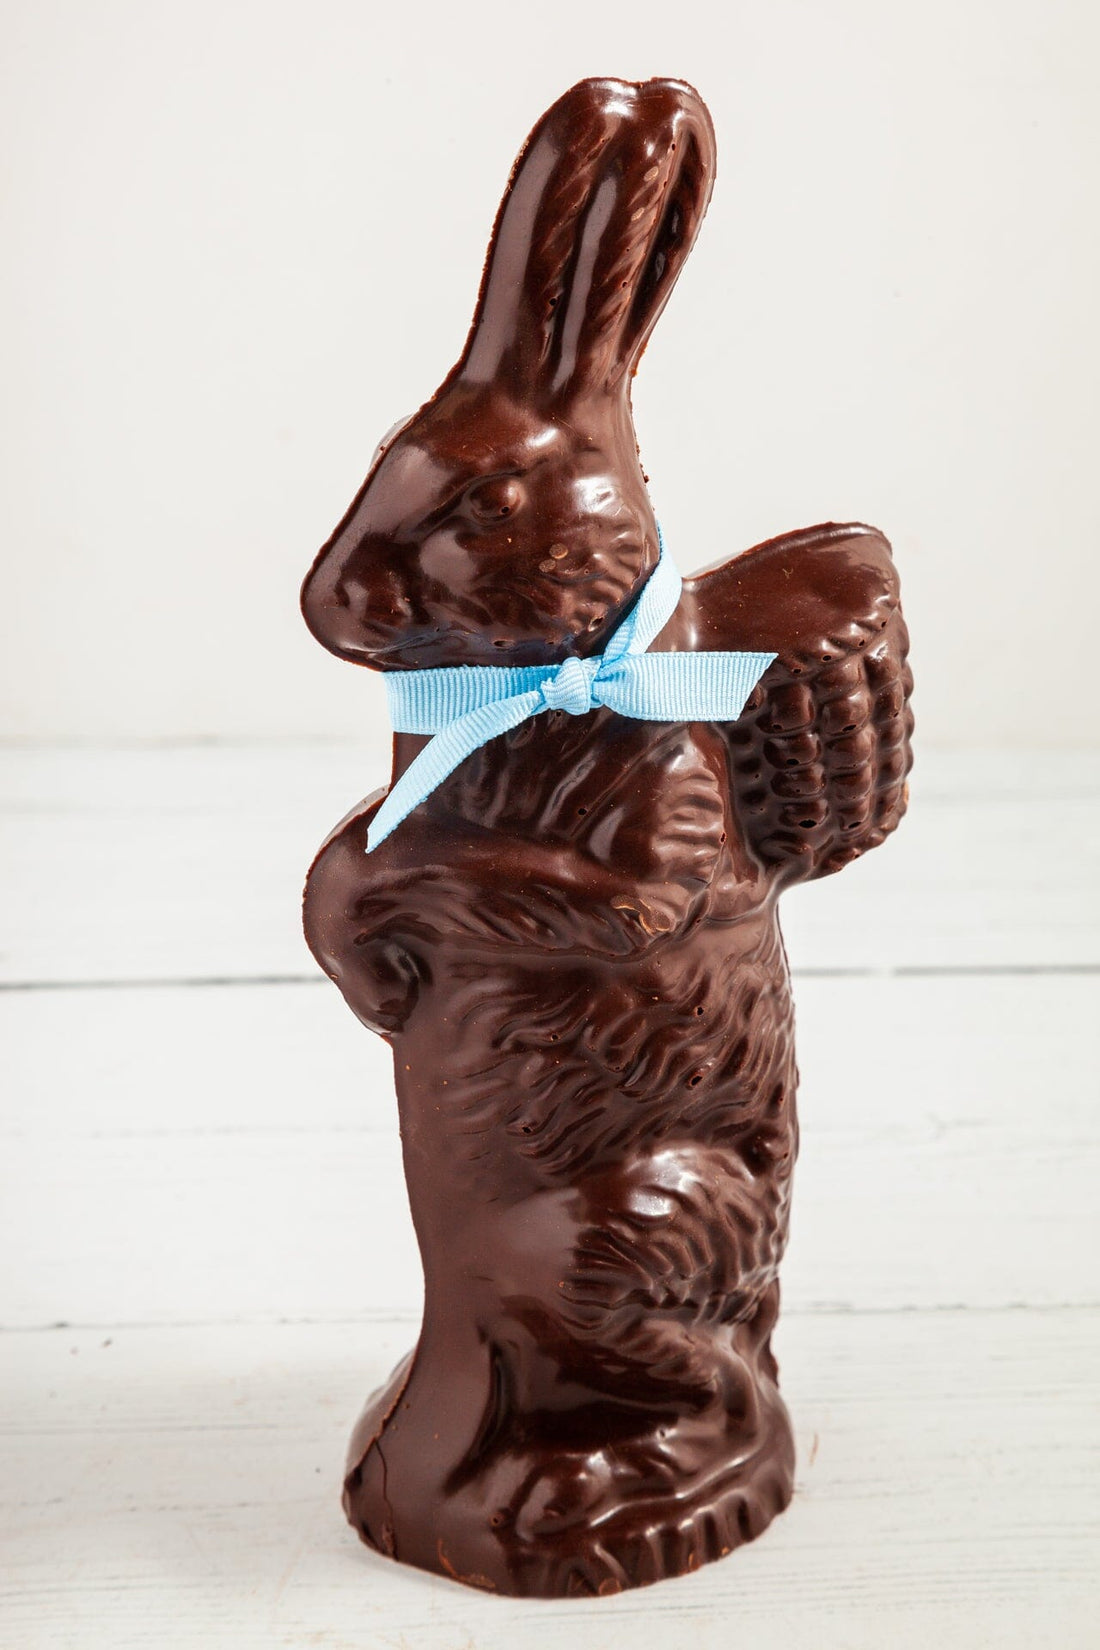 Large Vintage Chocolate Easter Bunny (Limited Edition) Romanicos Chocolate 15" Tall 